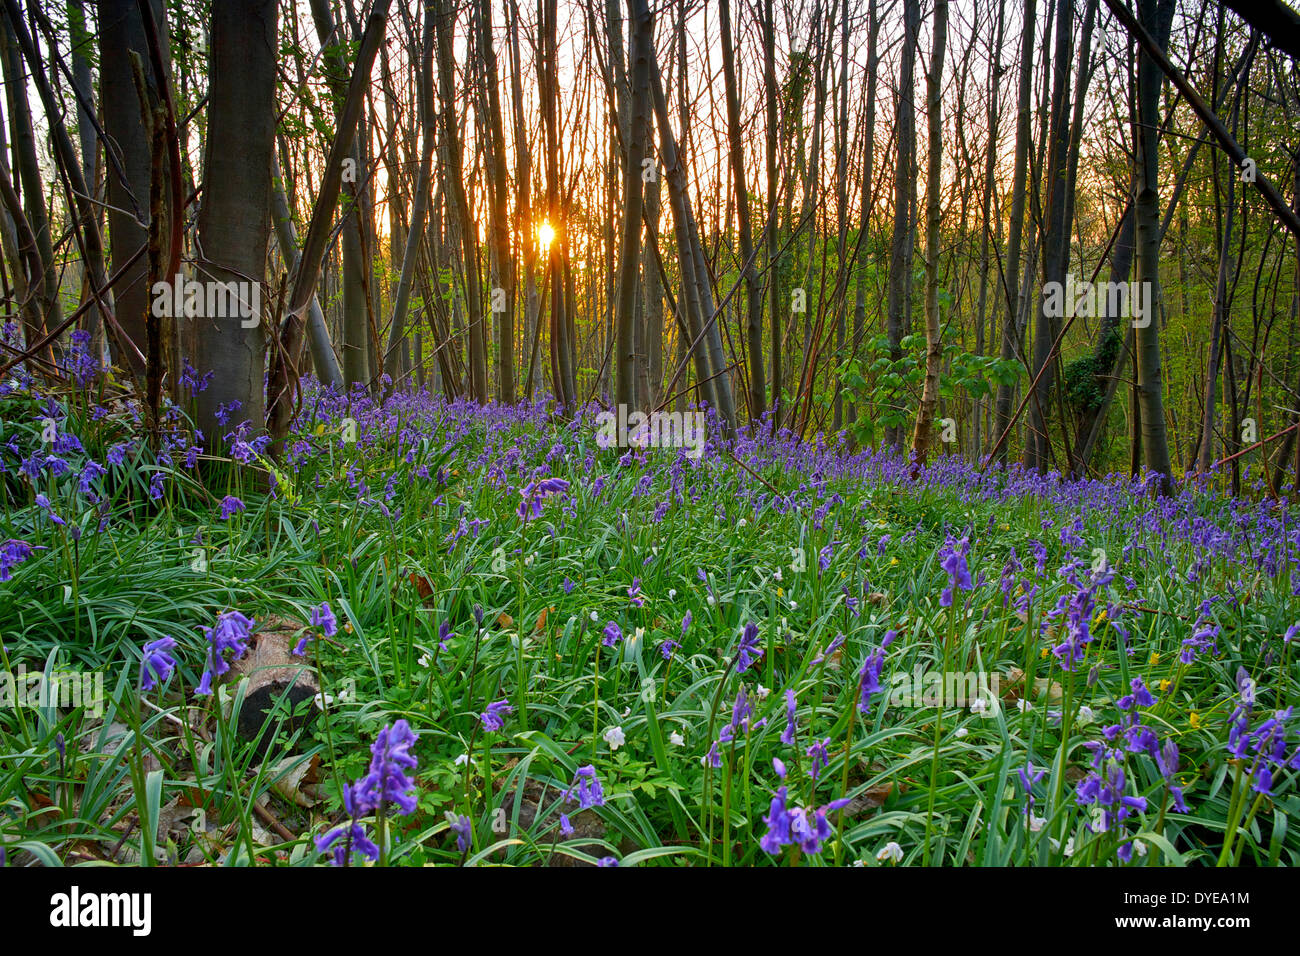 Faversham, Kent, UK 16th April 2014: The sun rises over early Bluebells (hyacinthoides non-scripta)  in Bysing wood near Faversham as high pressure dominates the weather over much of the country and provides some warm and dry days. Credit:  Alan Payton/Alamy Live News Stock Photo